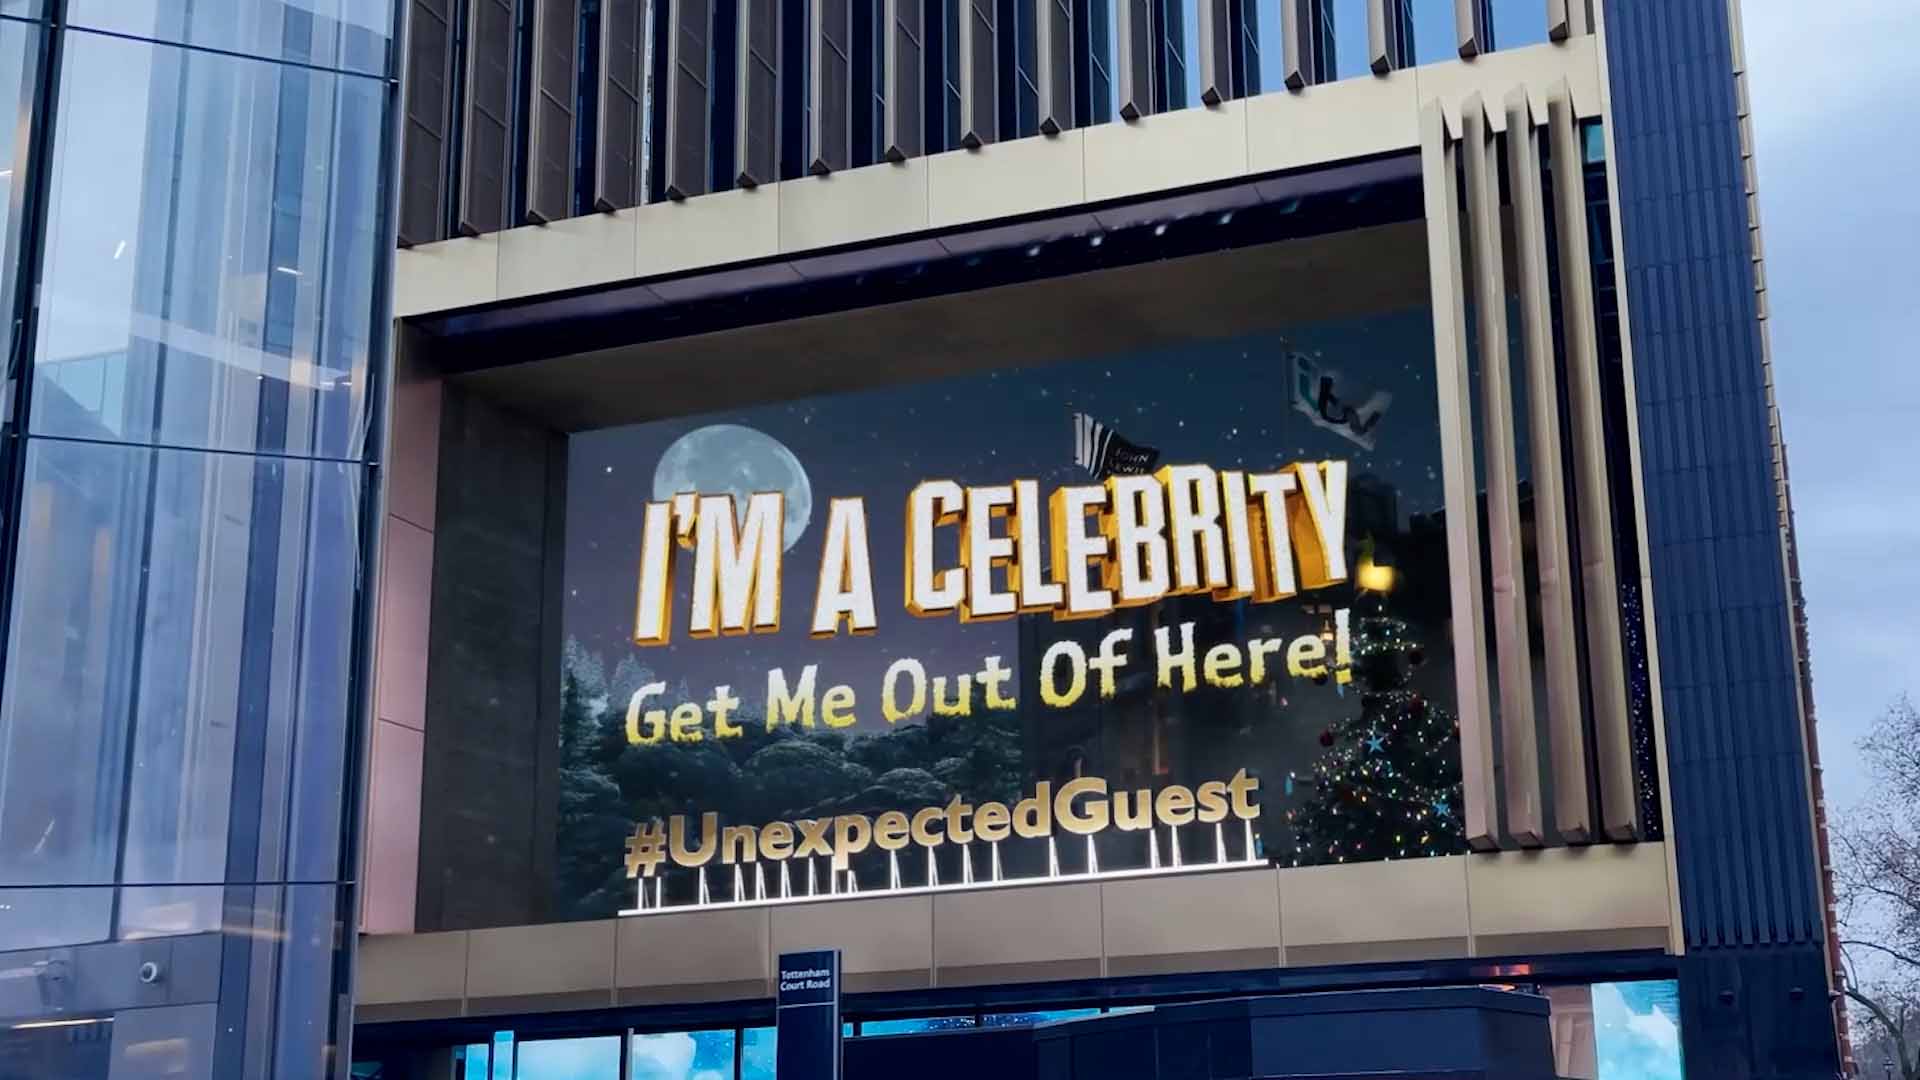 I'm A Celebrity Get Me Out Of Here promo on screen inside The Now Building